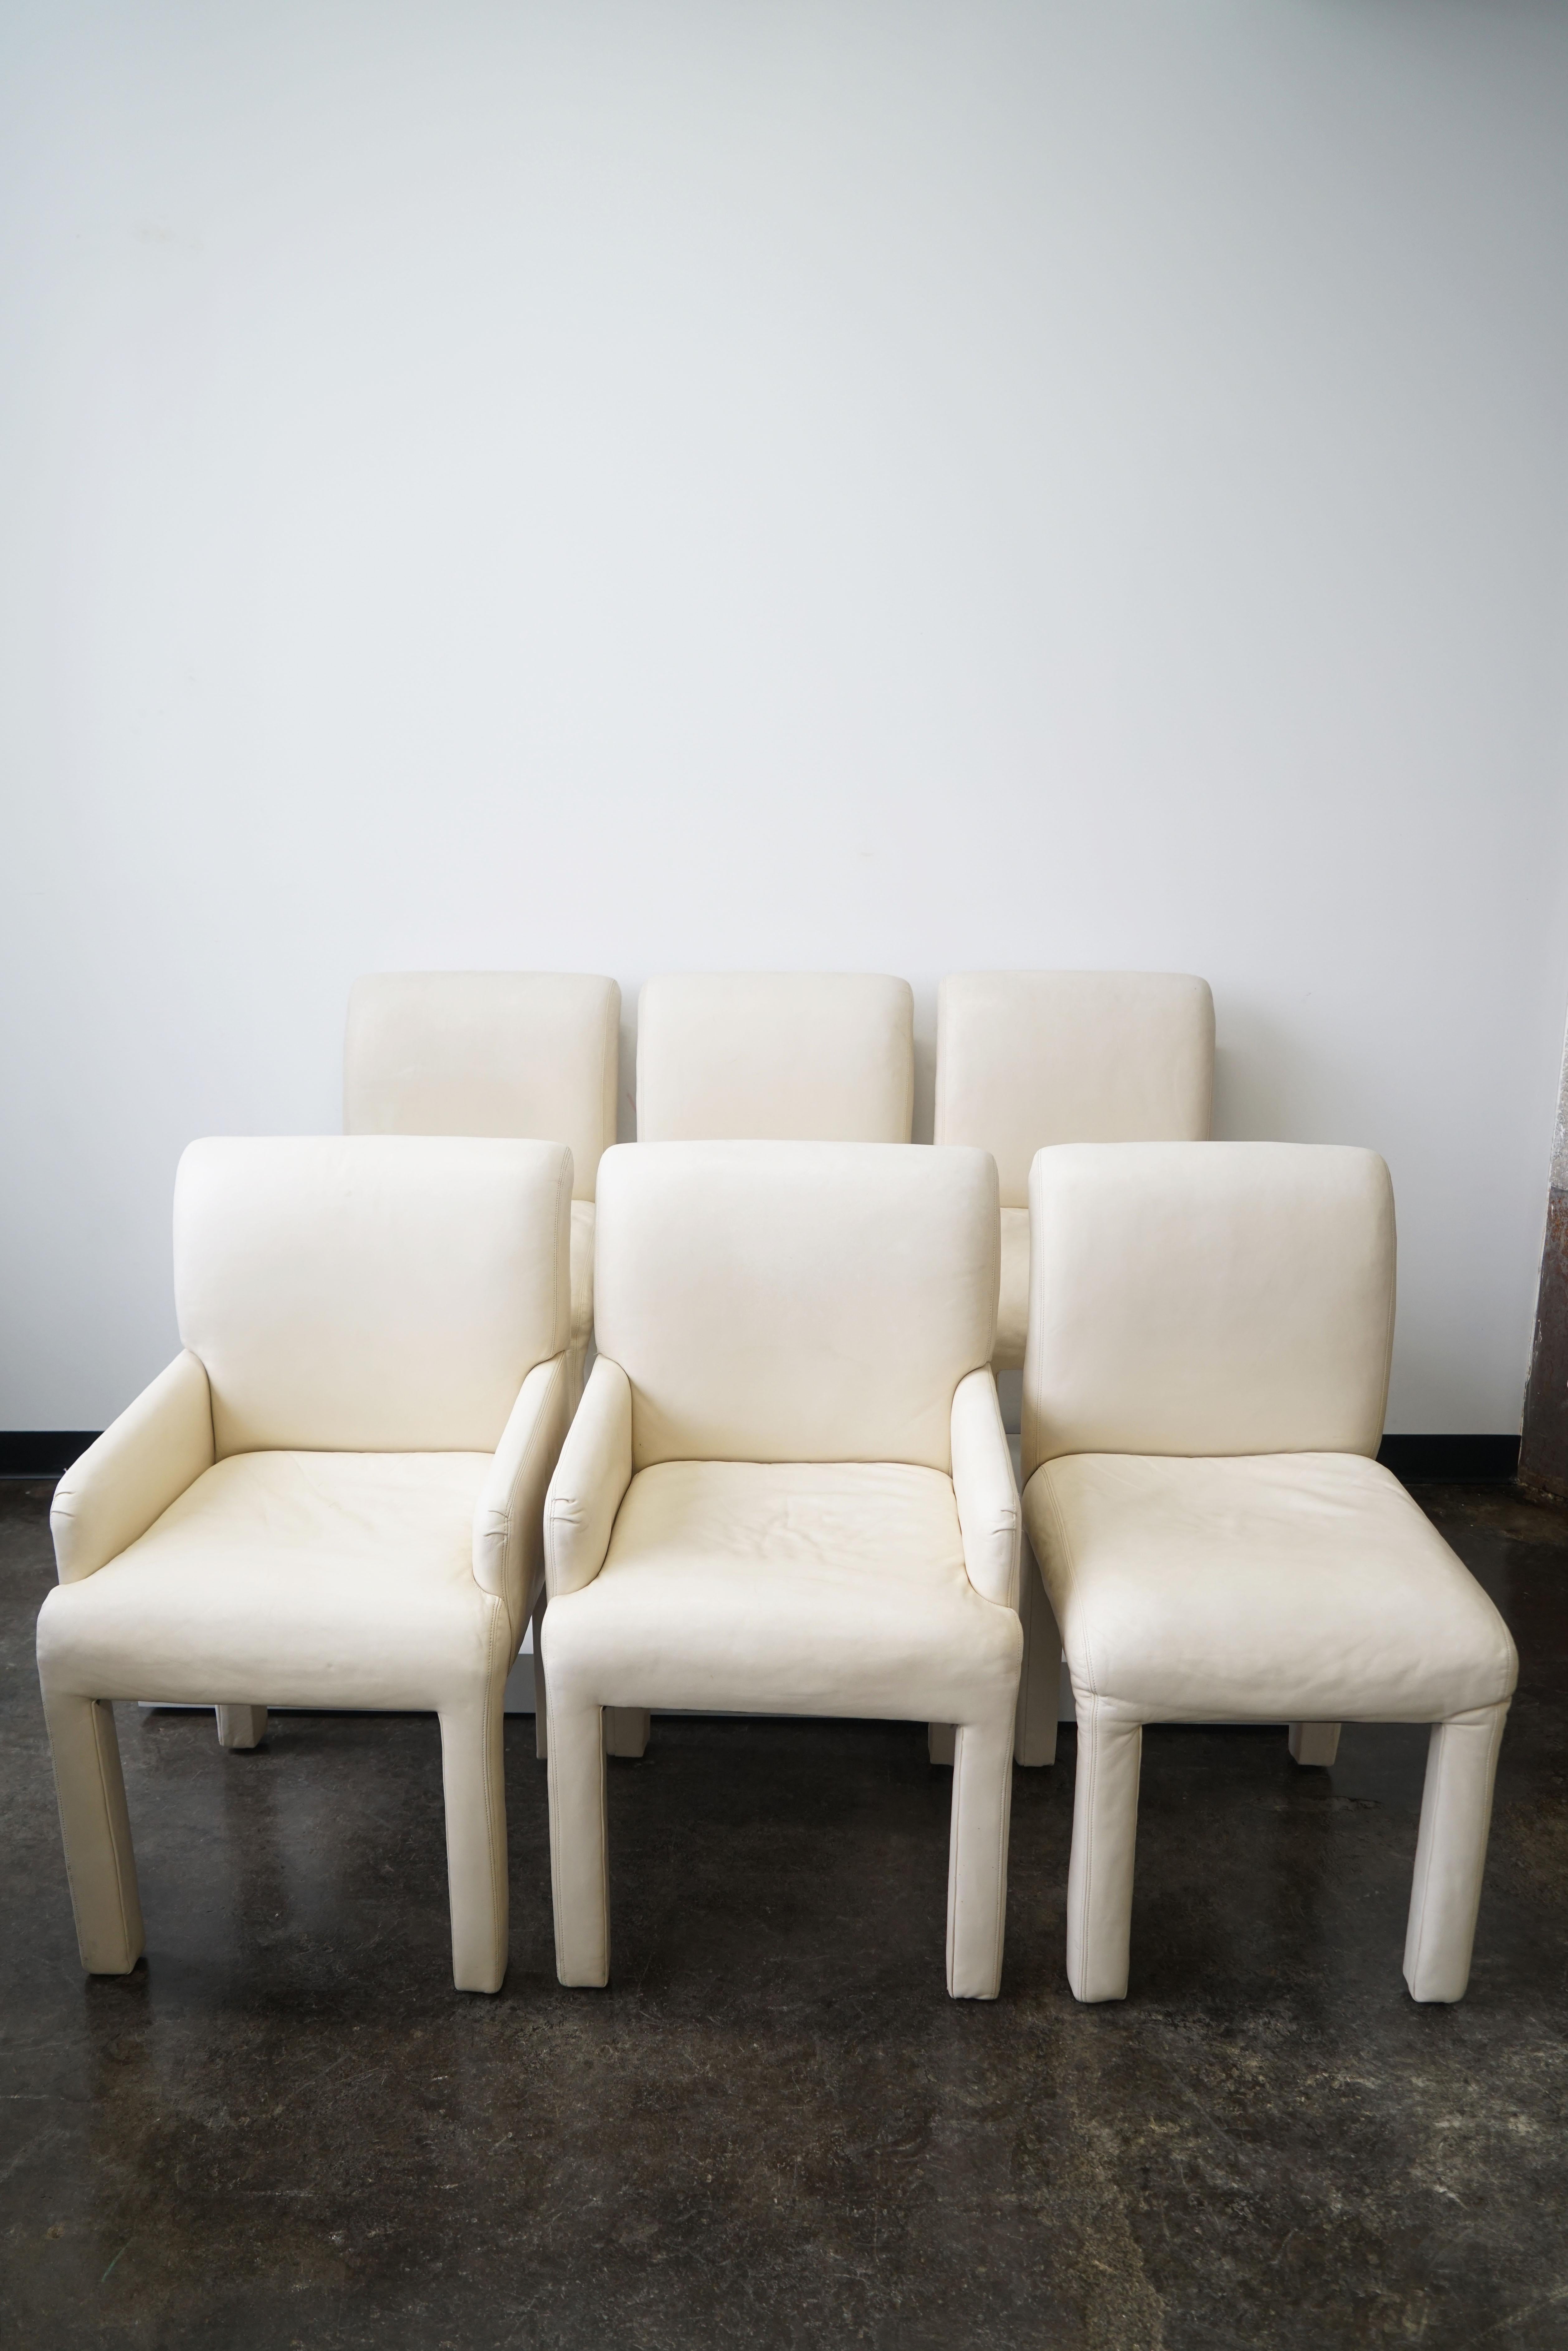 Set of 6 Modern Parson Dining Chairs made by Directional.

Off-white in color
Fully upholstered
4 arm-less chairs and 2 with arms.

Armchairs: 22